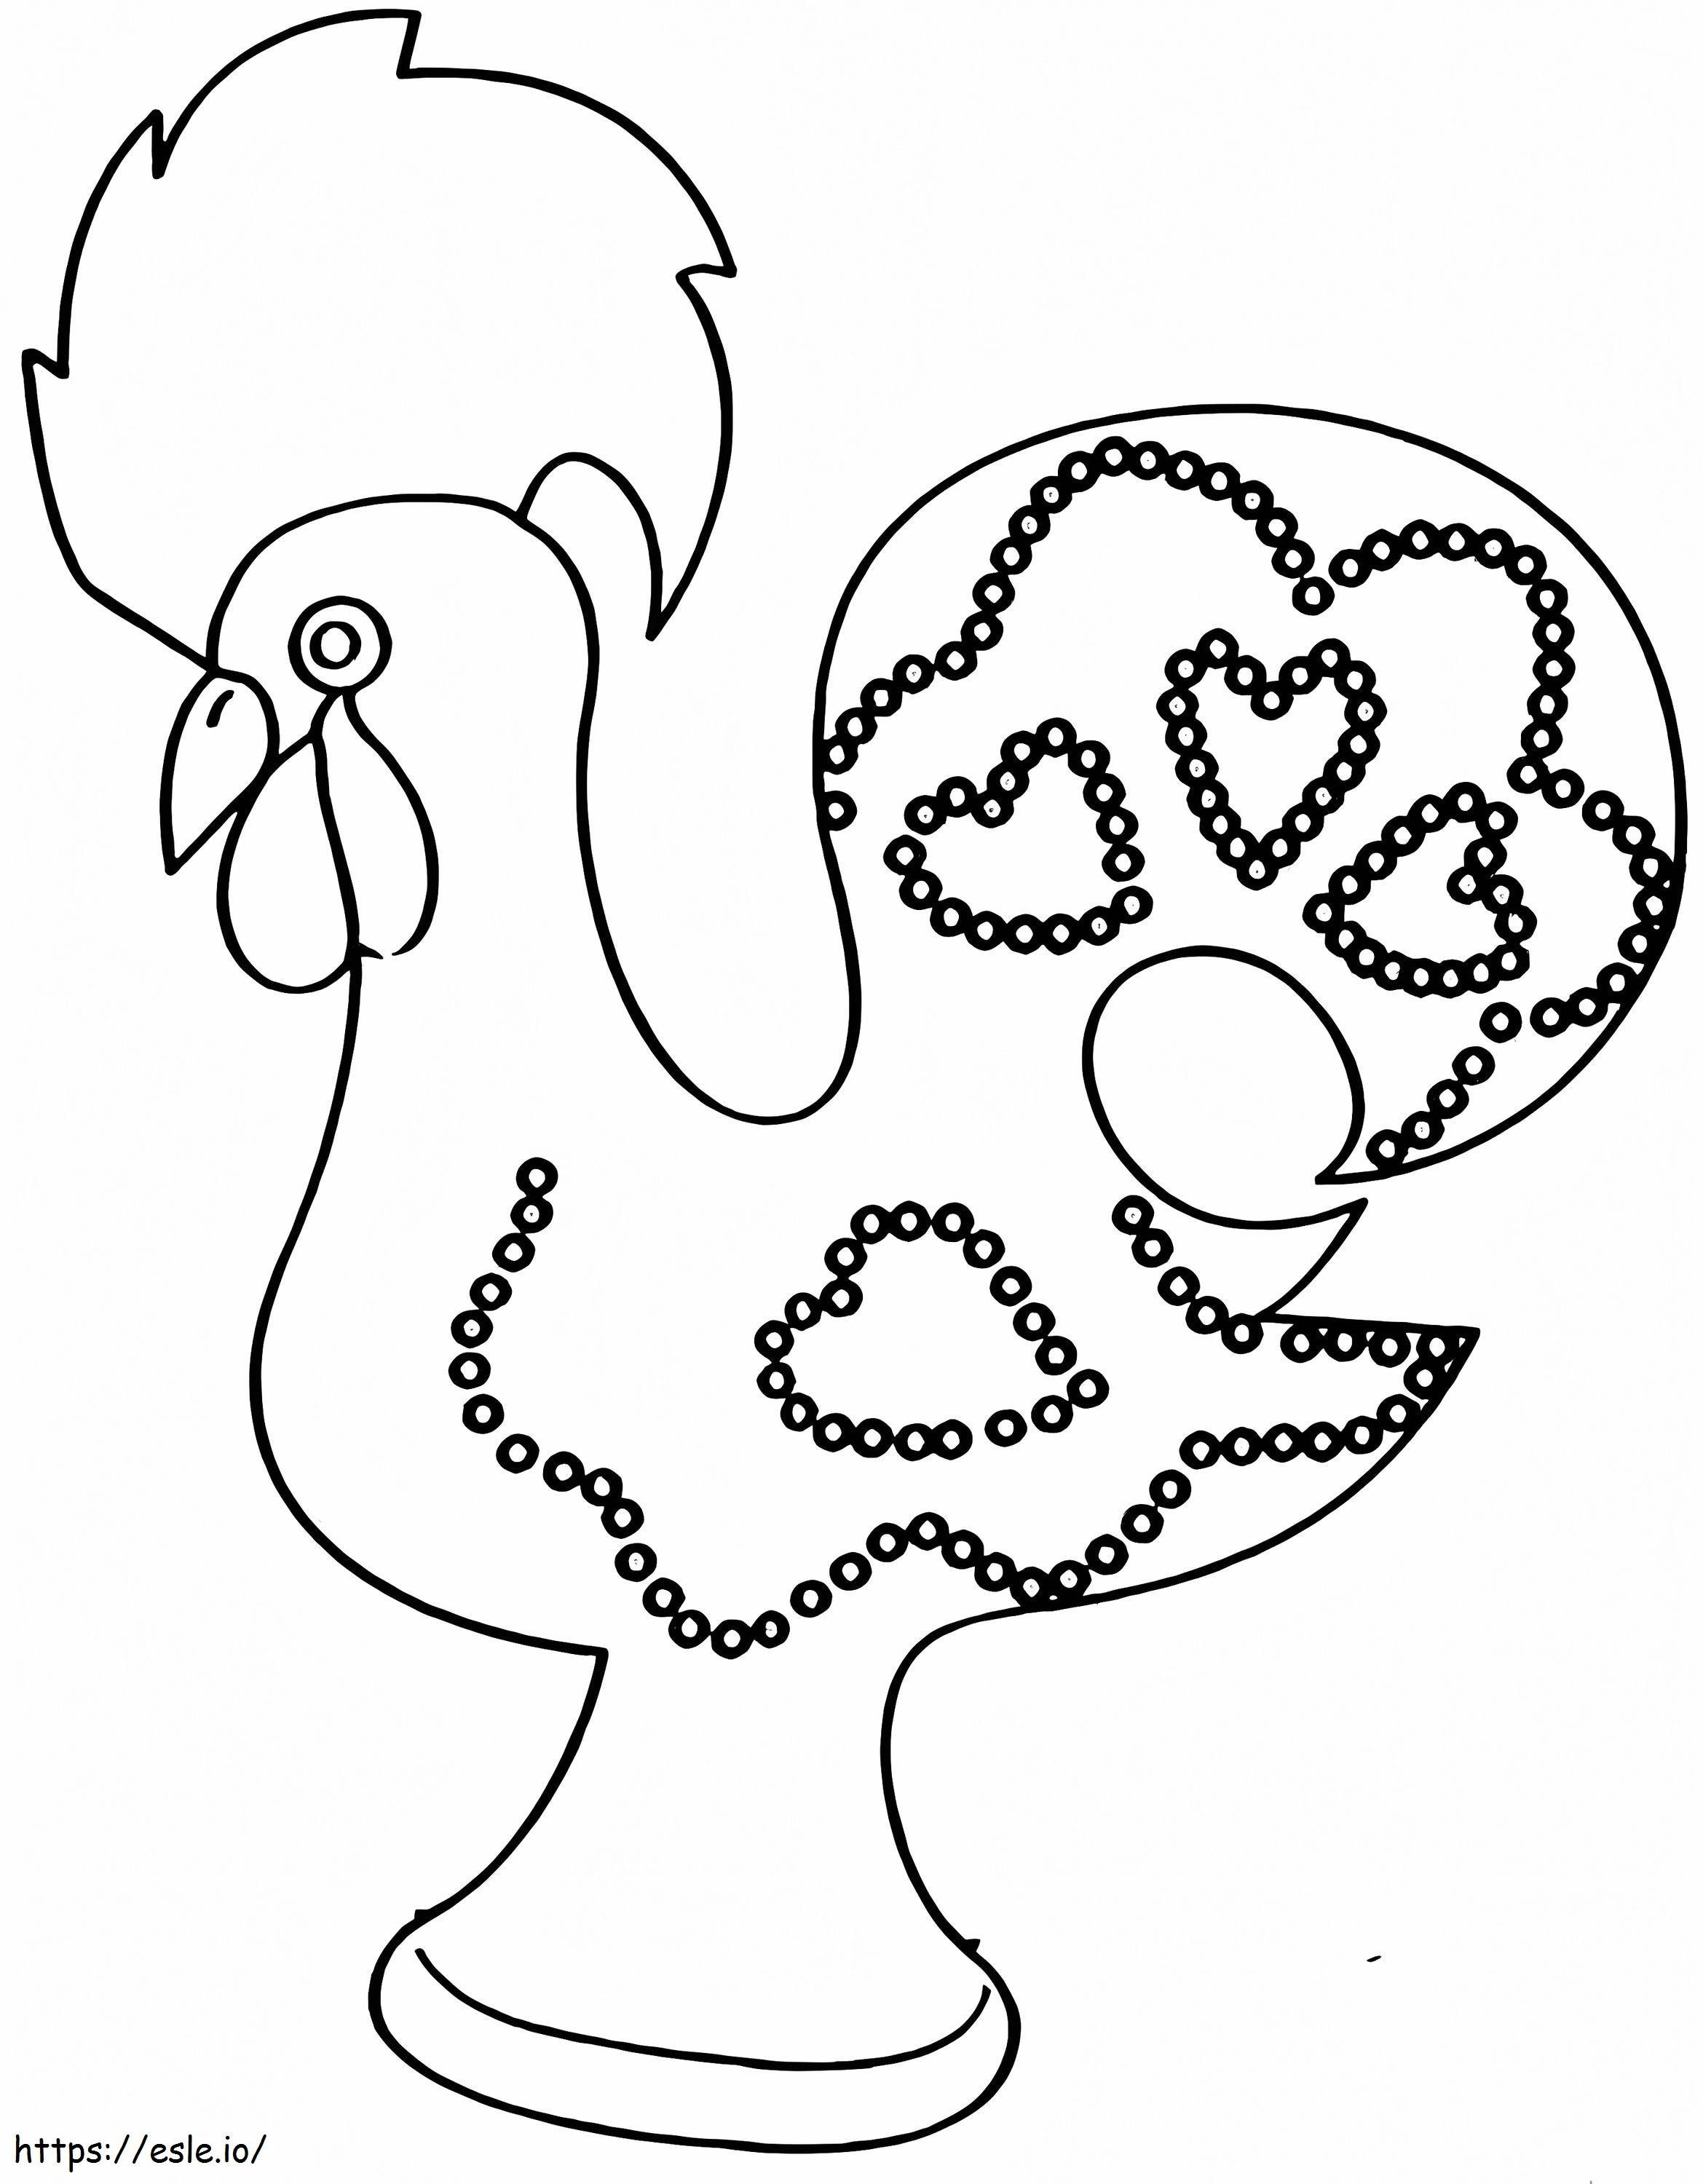 Portuguese Rooster coloring page